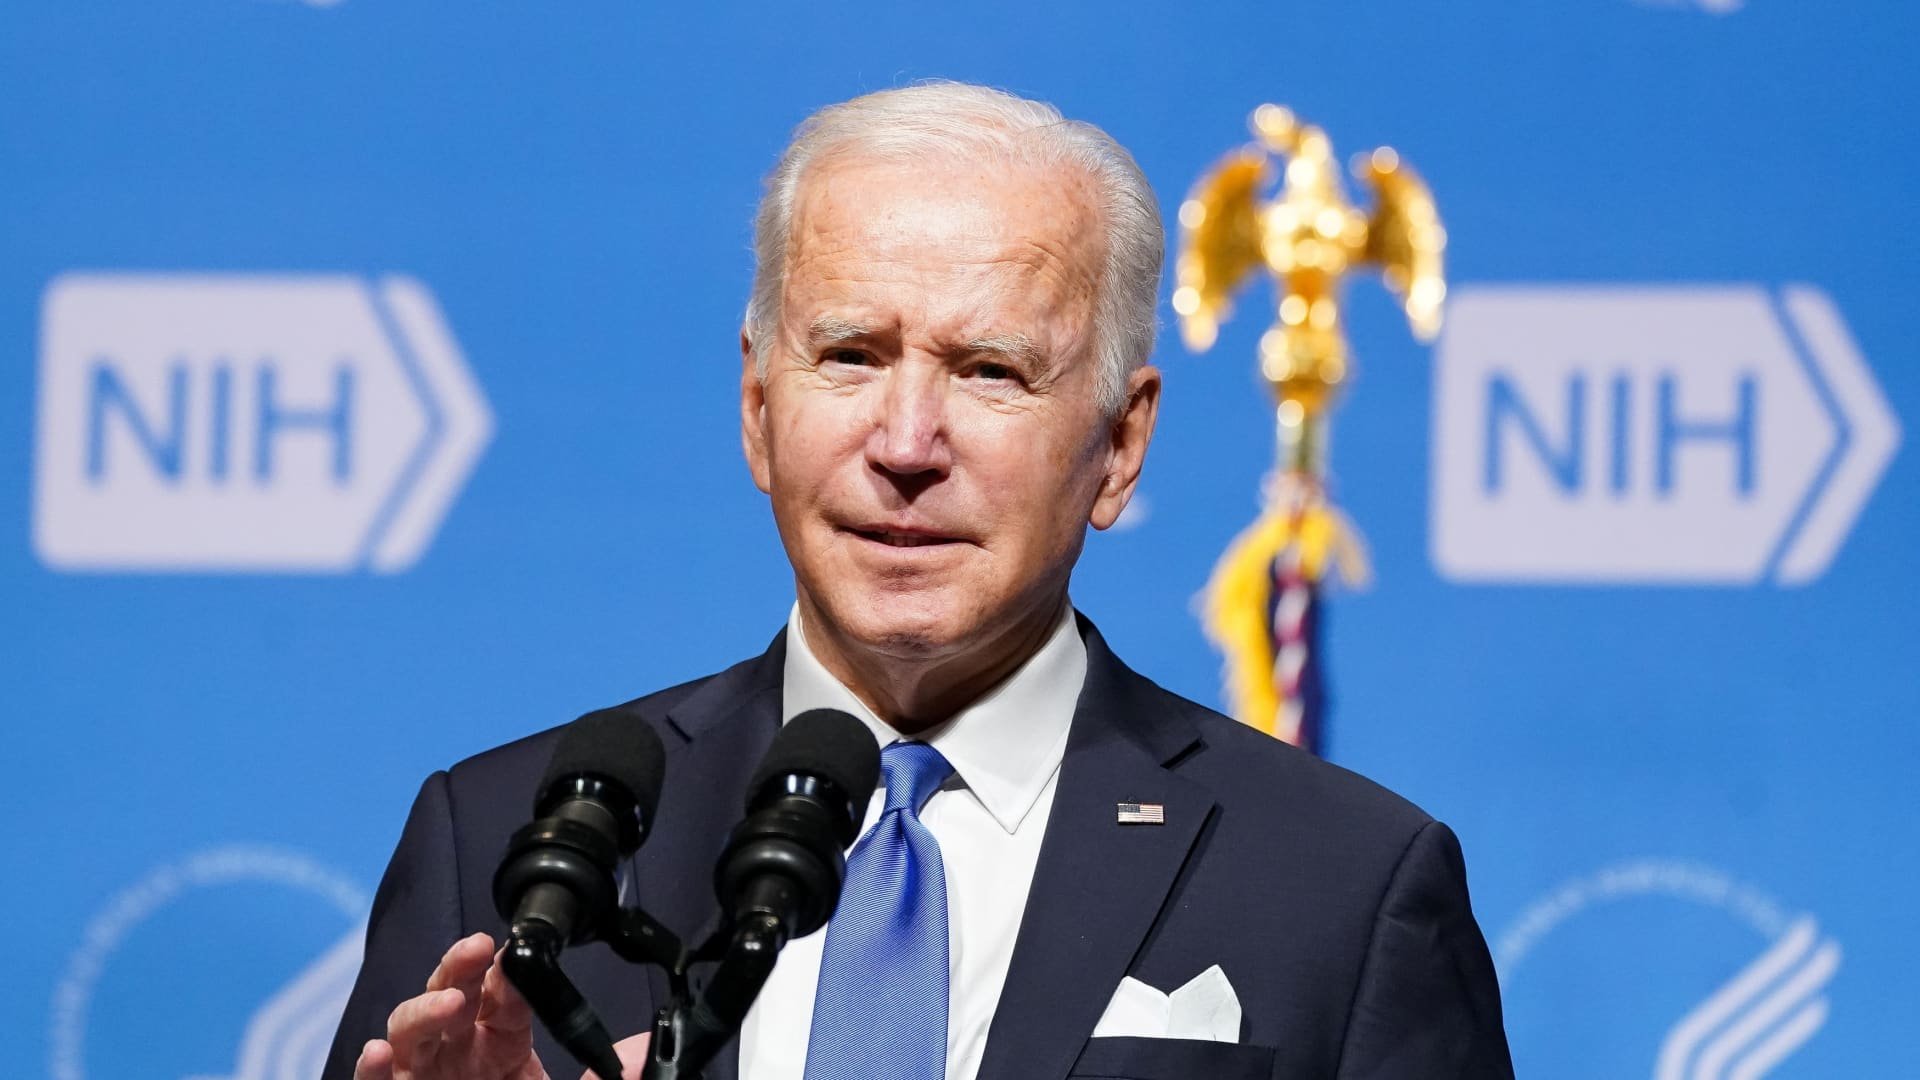 Biden says he doesn't want lockdowns and won't expand vaccine mandates to fight Covid this winter